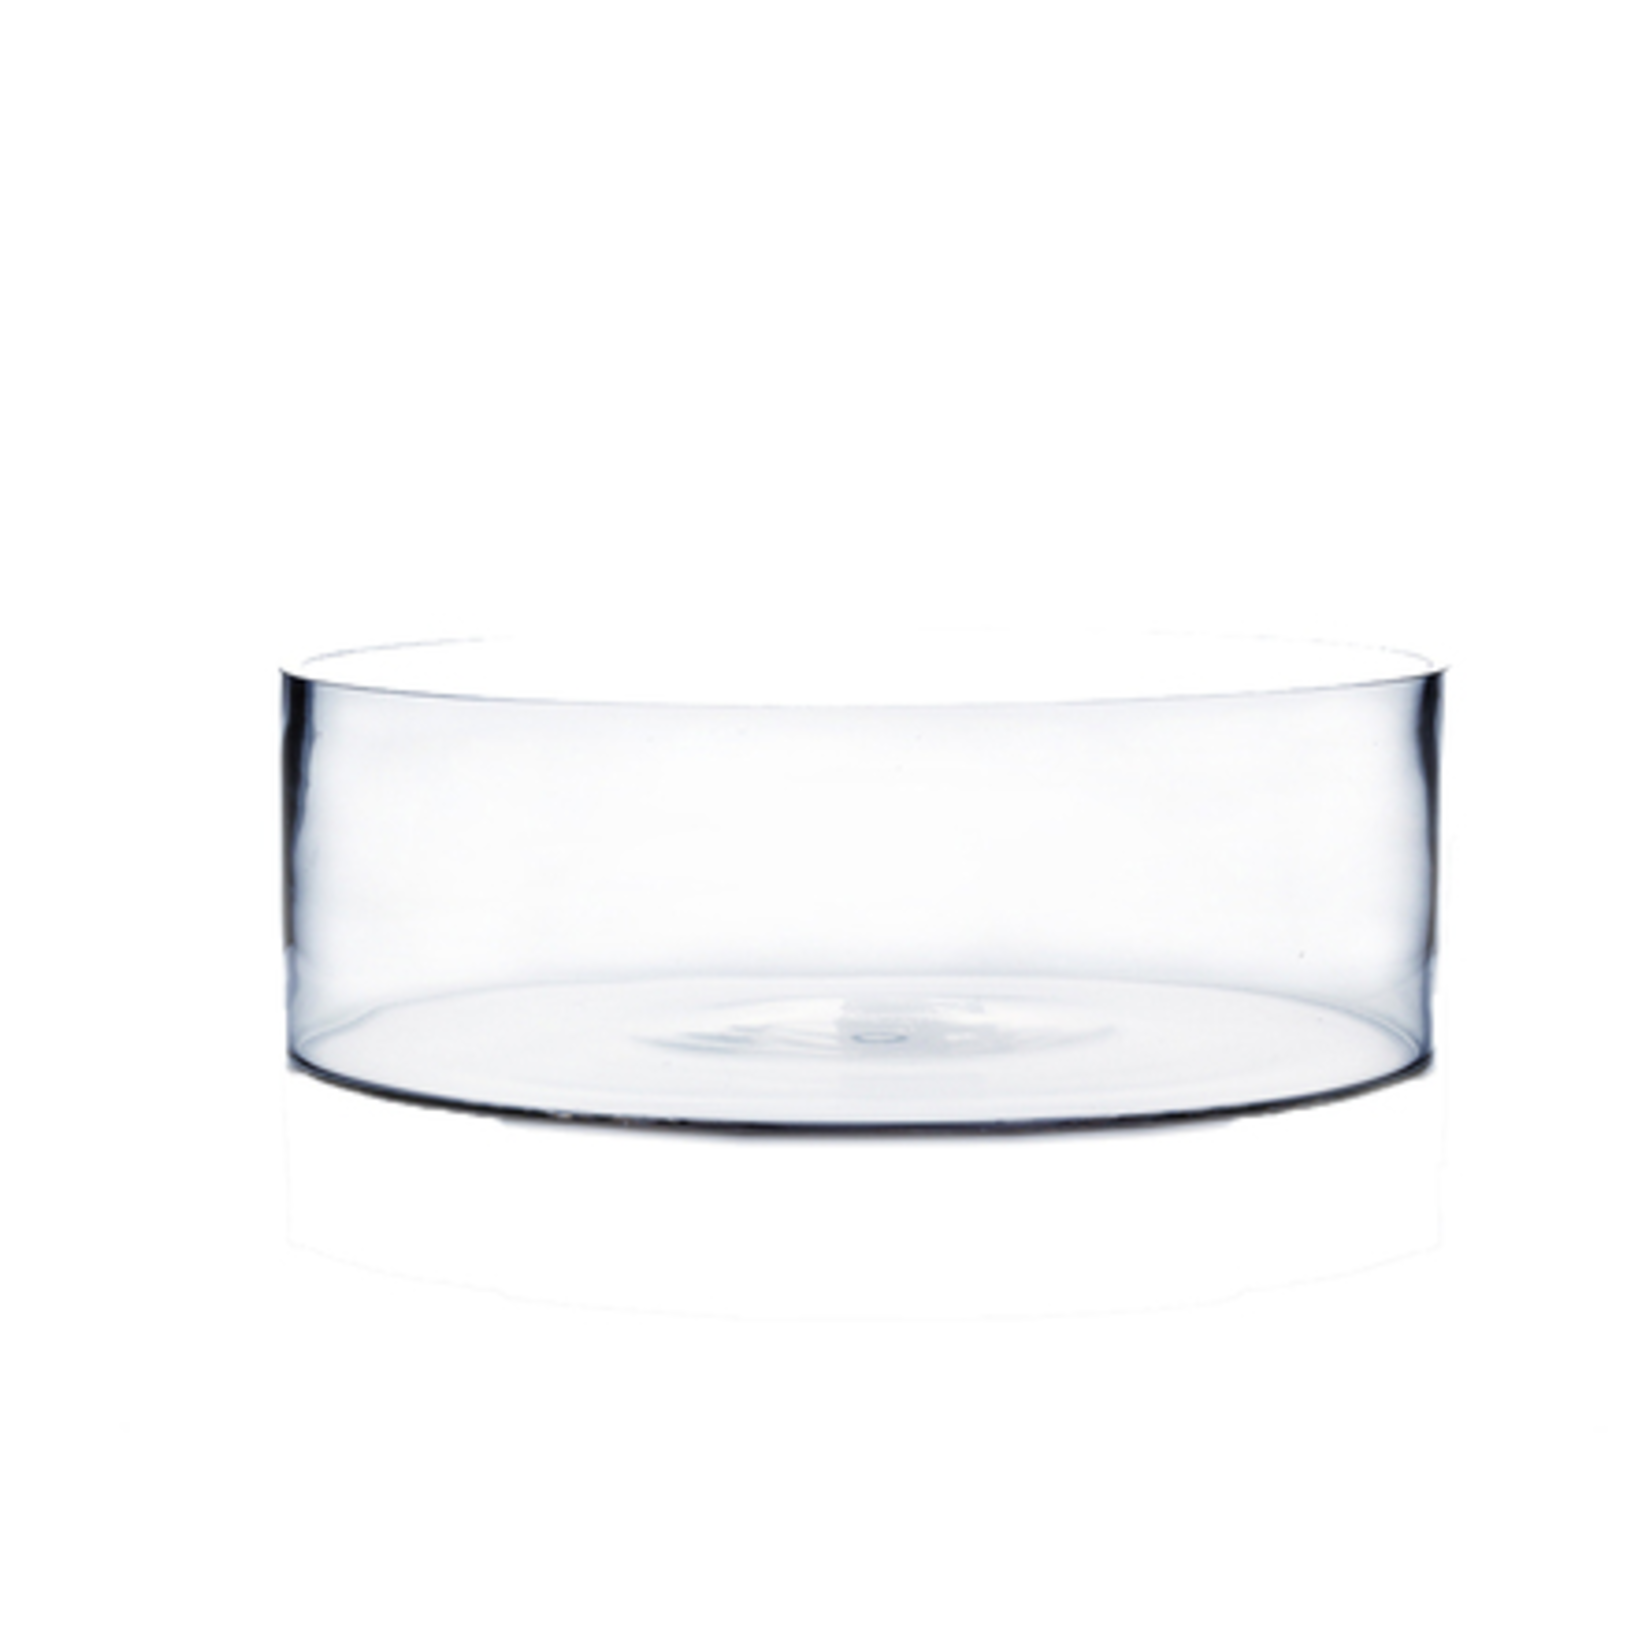 4"H X 15"D CLEAR GLASS LOW CYLINDER